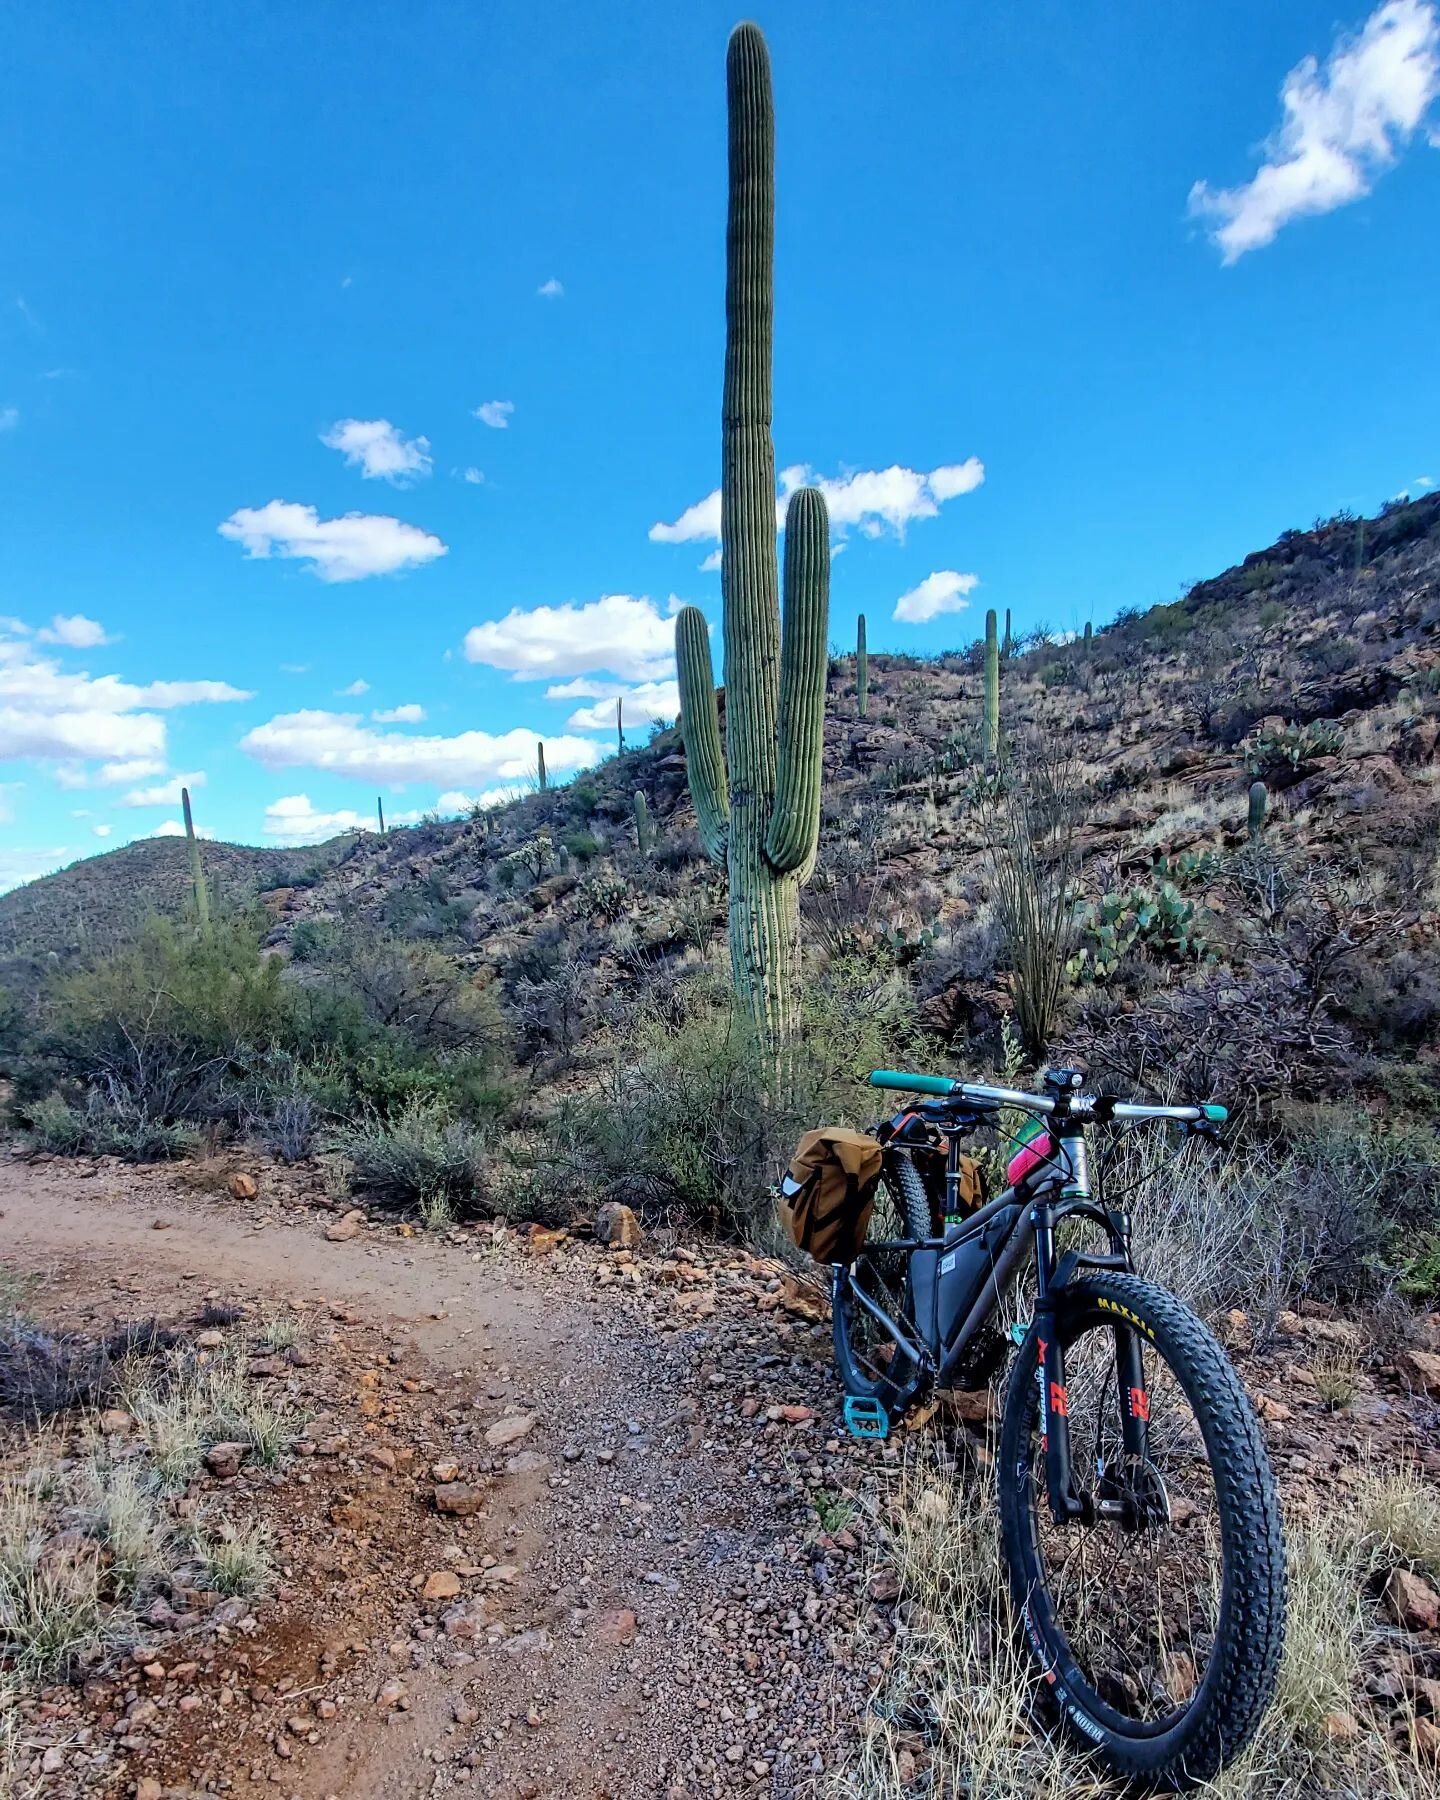 Please tell me someone got a photo of this bike with the grill on the back.

#eskercycles #eskerhaydukelvs #chillinandgrillin #ssaz2024 #supportcrew #refreshments #sustinance #cactus #mesquitegrilling #supportyourlocaldirtbag #tucsonmountains #gearsa